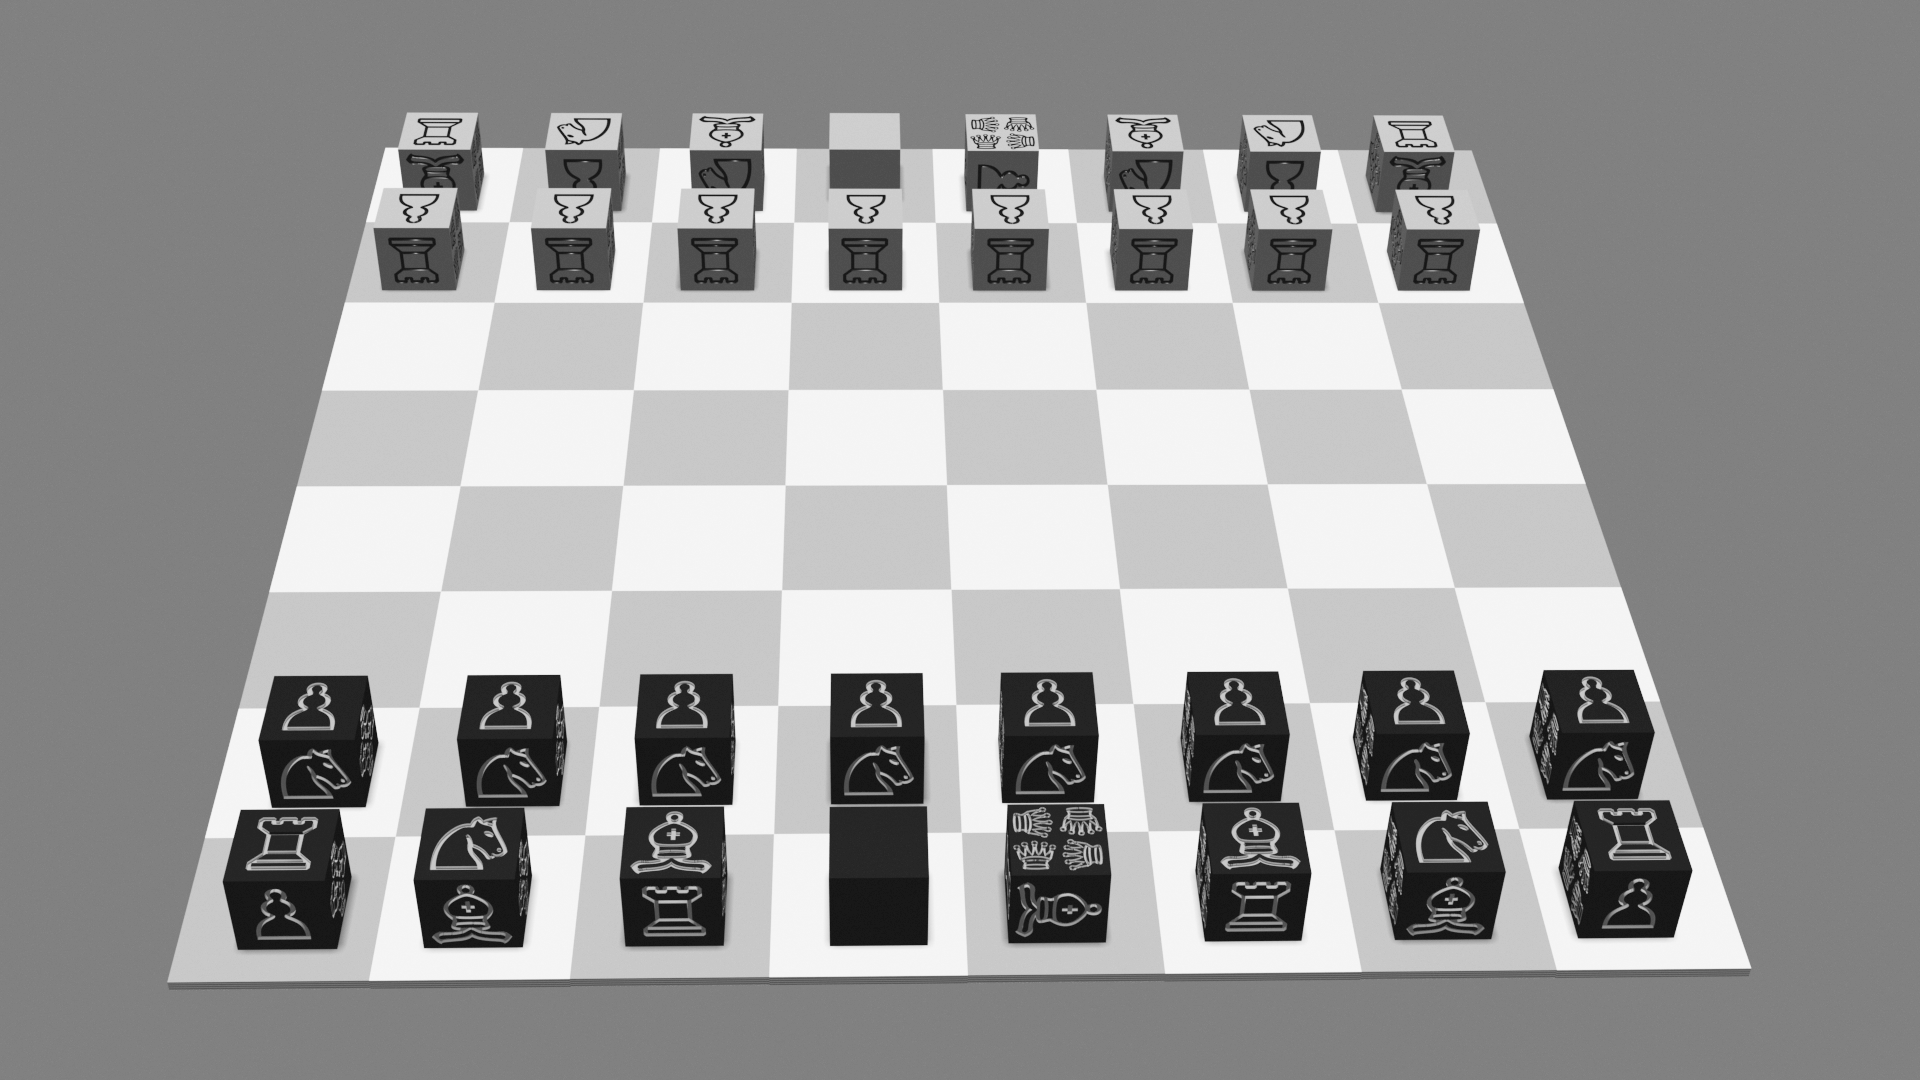 3D rendering of white and black Rolling Chess 6-sided die pieces on an 8x8 standard chess board